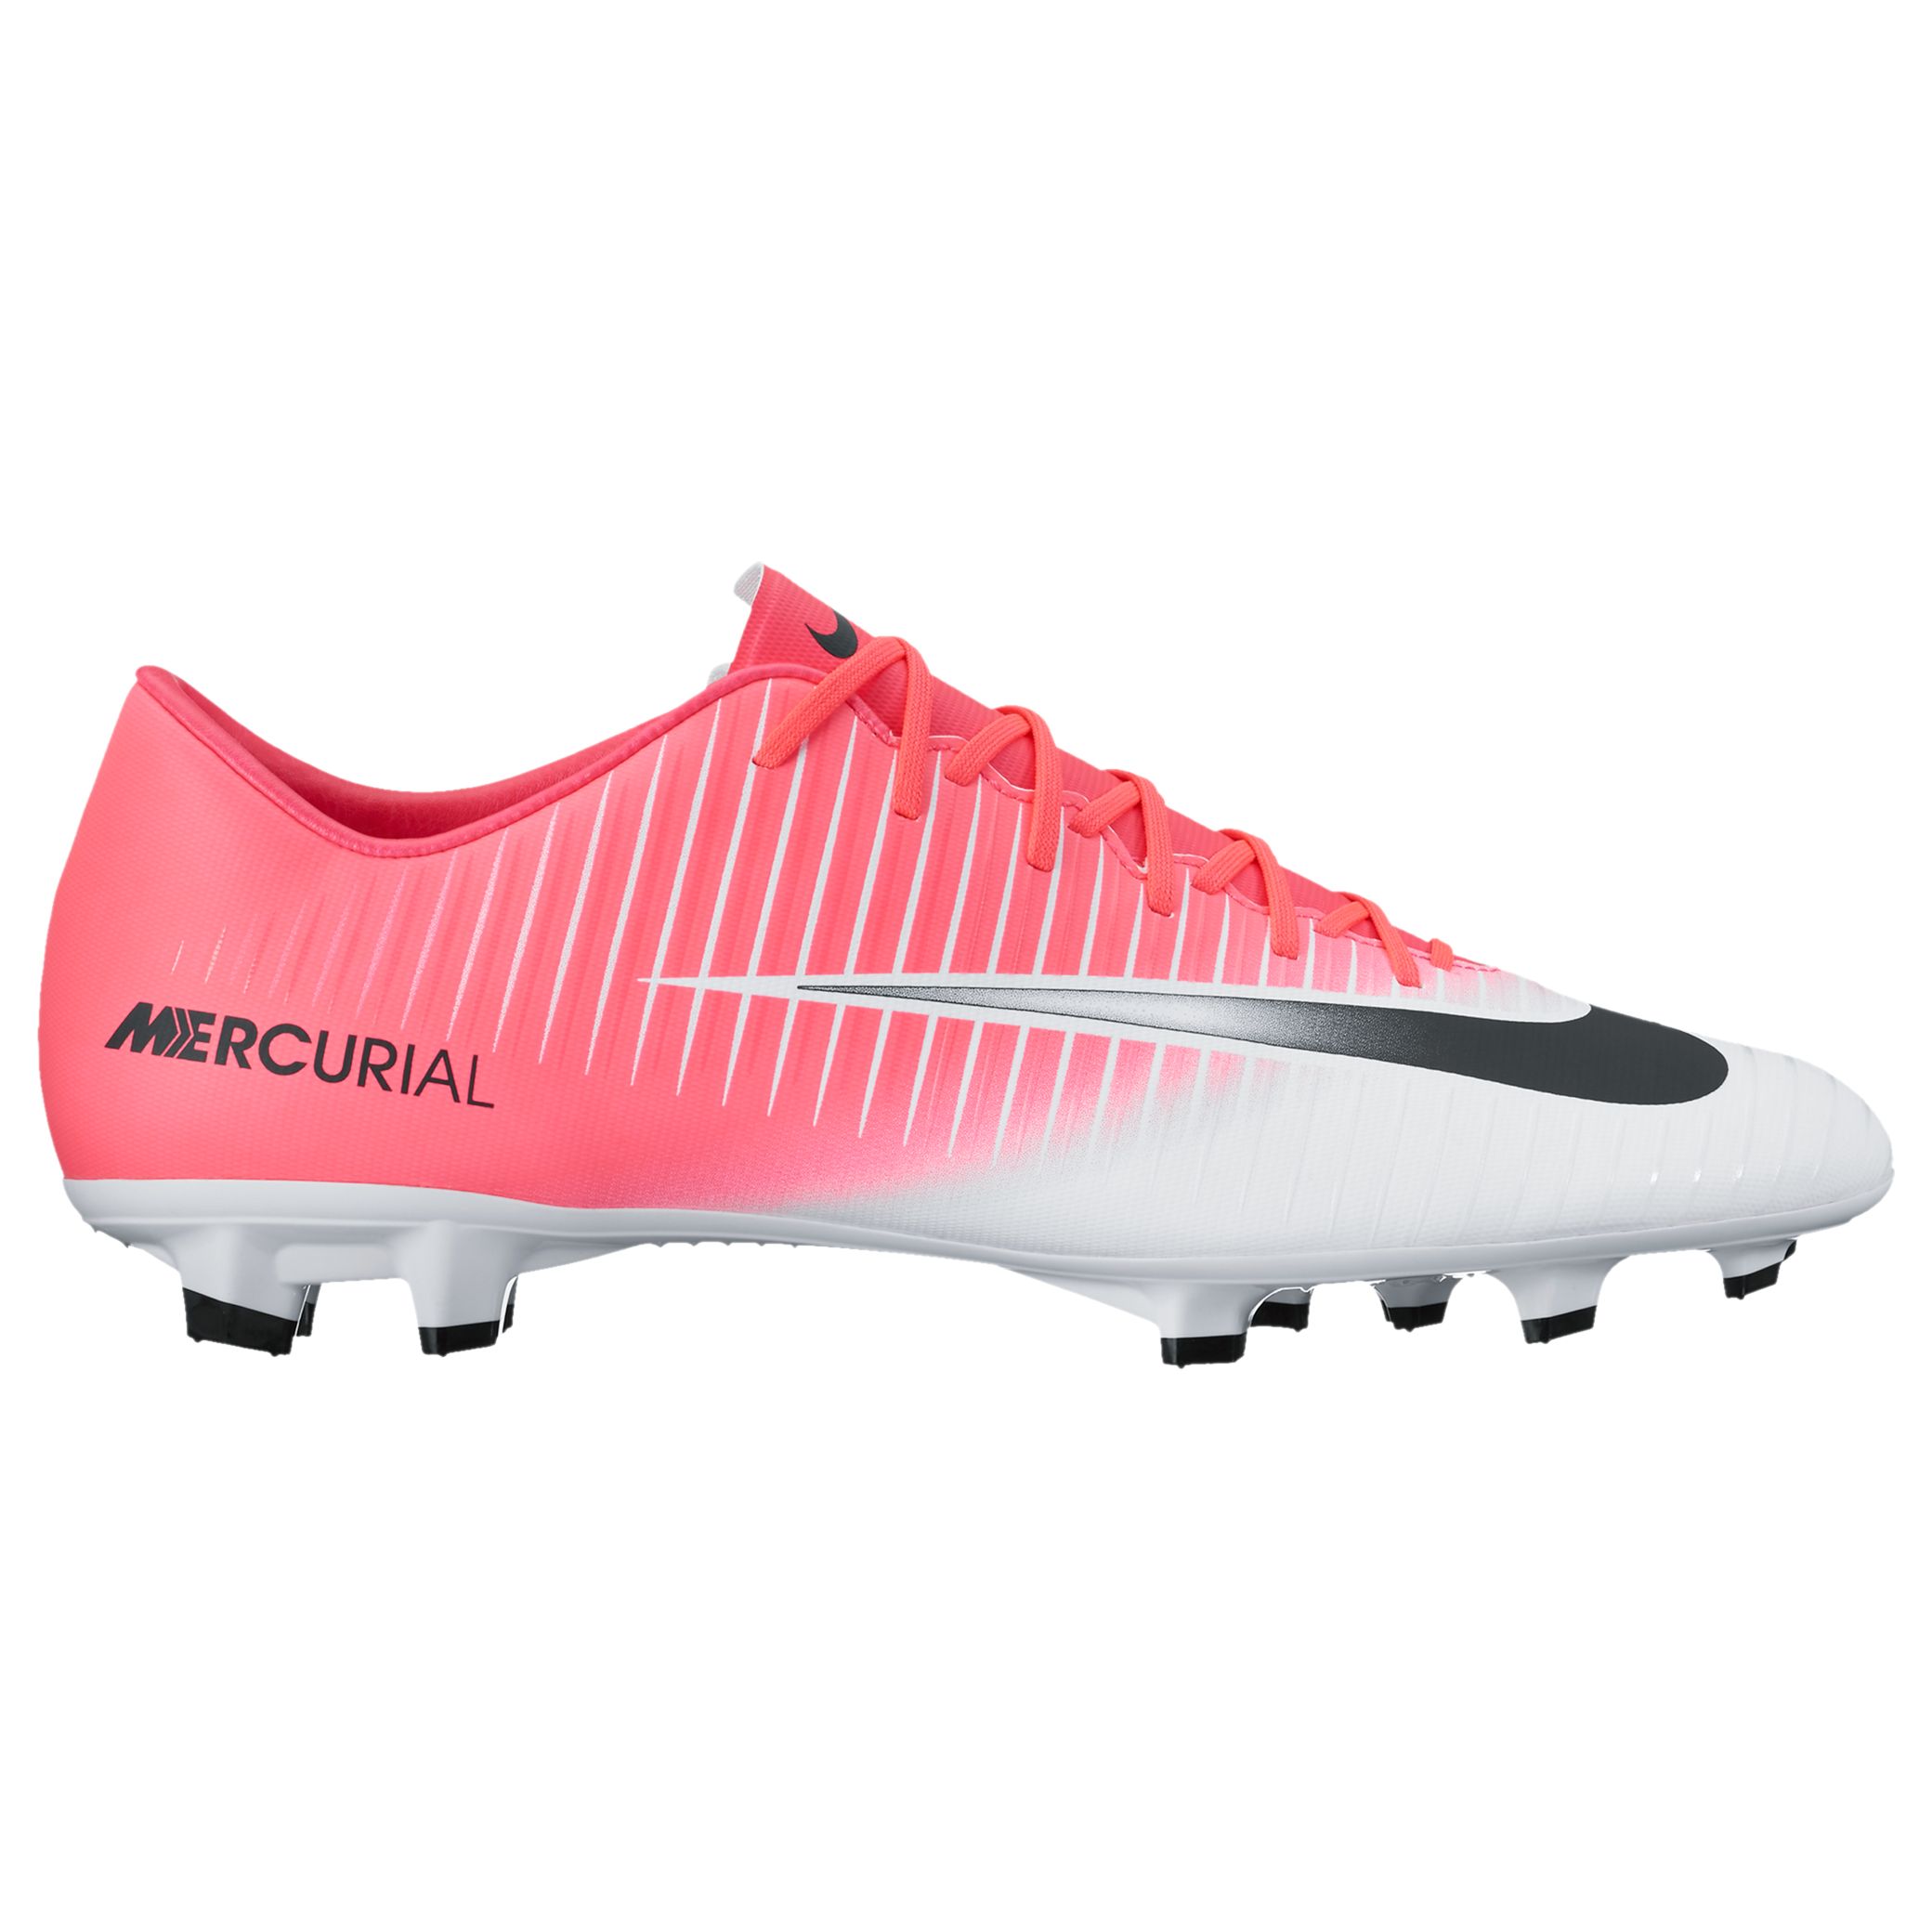 white mercurial football boots